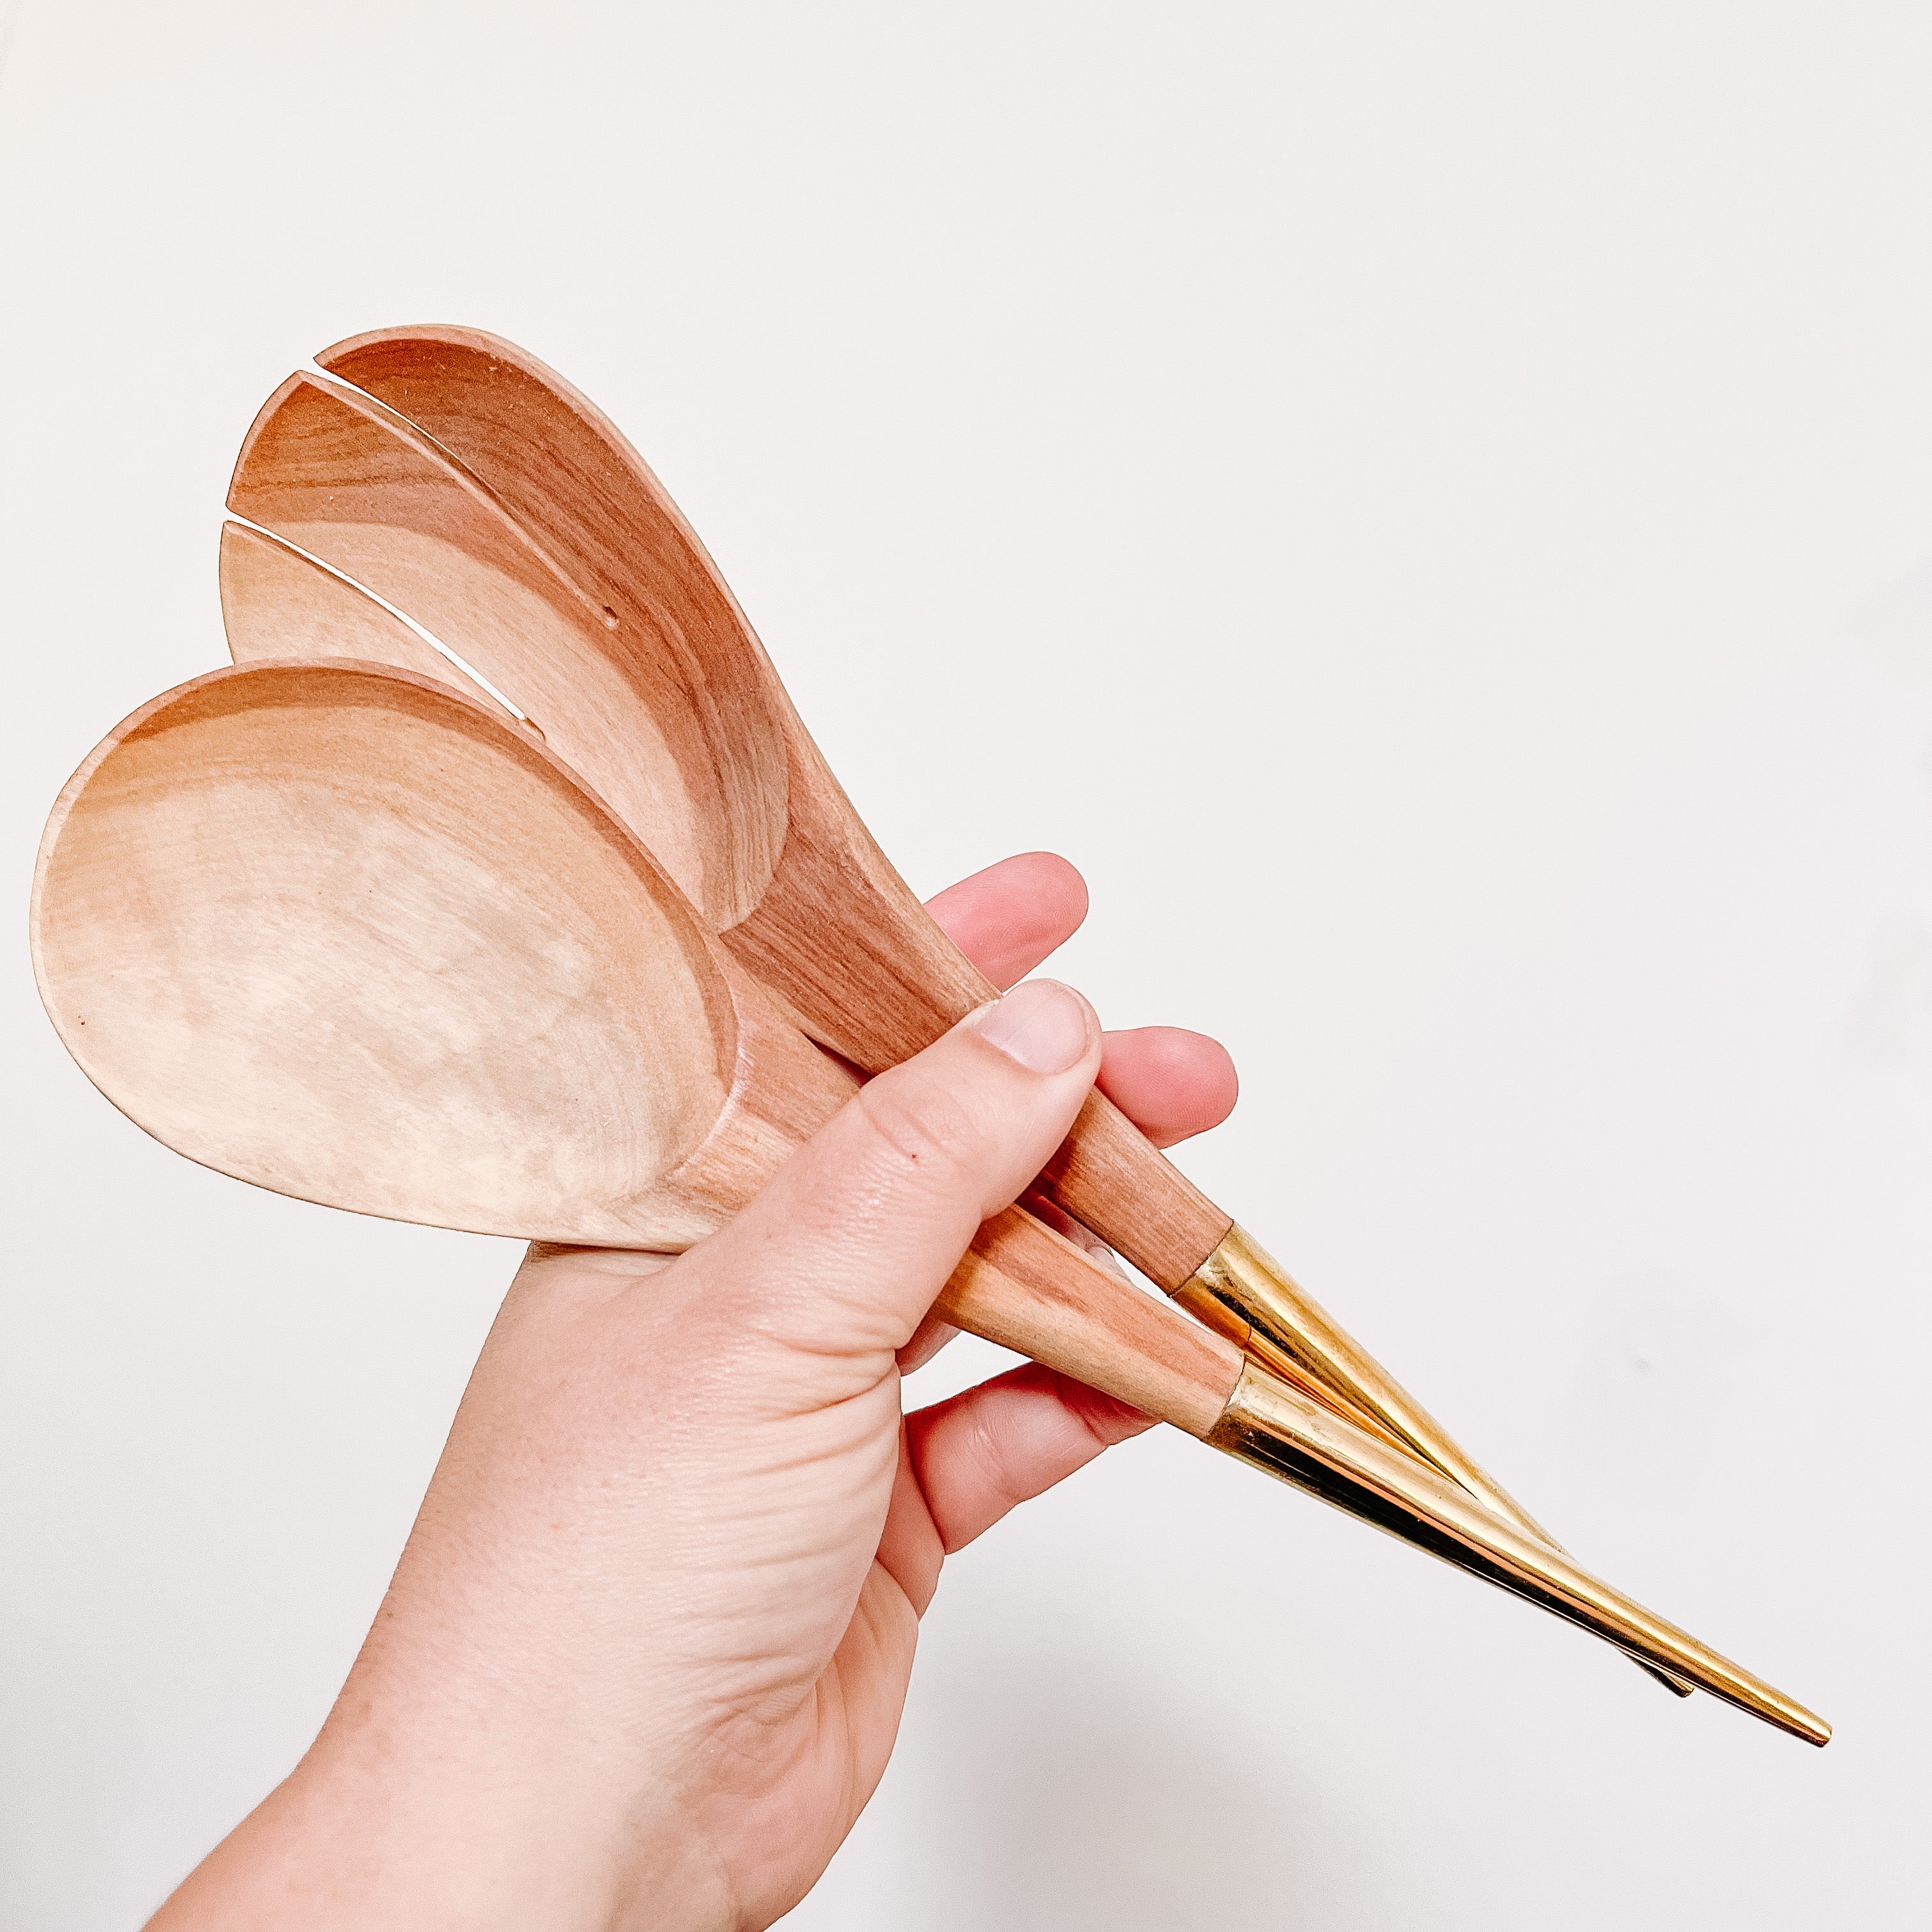 JustOne's handcrafted wooden salad spoons with a handle made of brass that comes to a point, made in Kenya